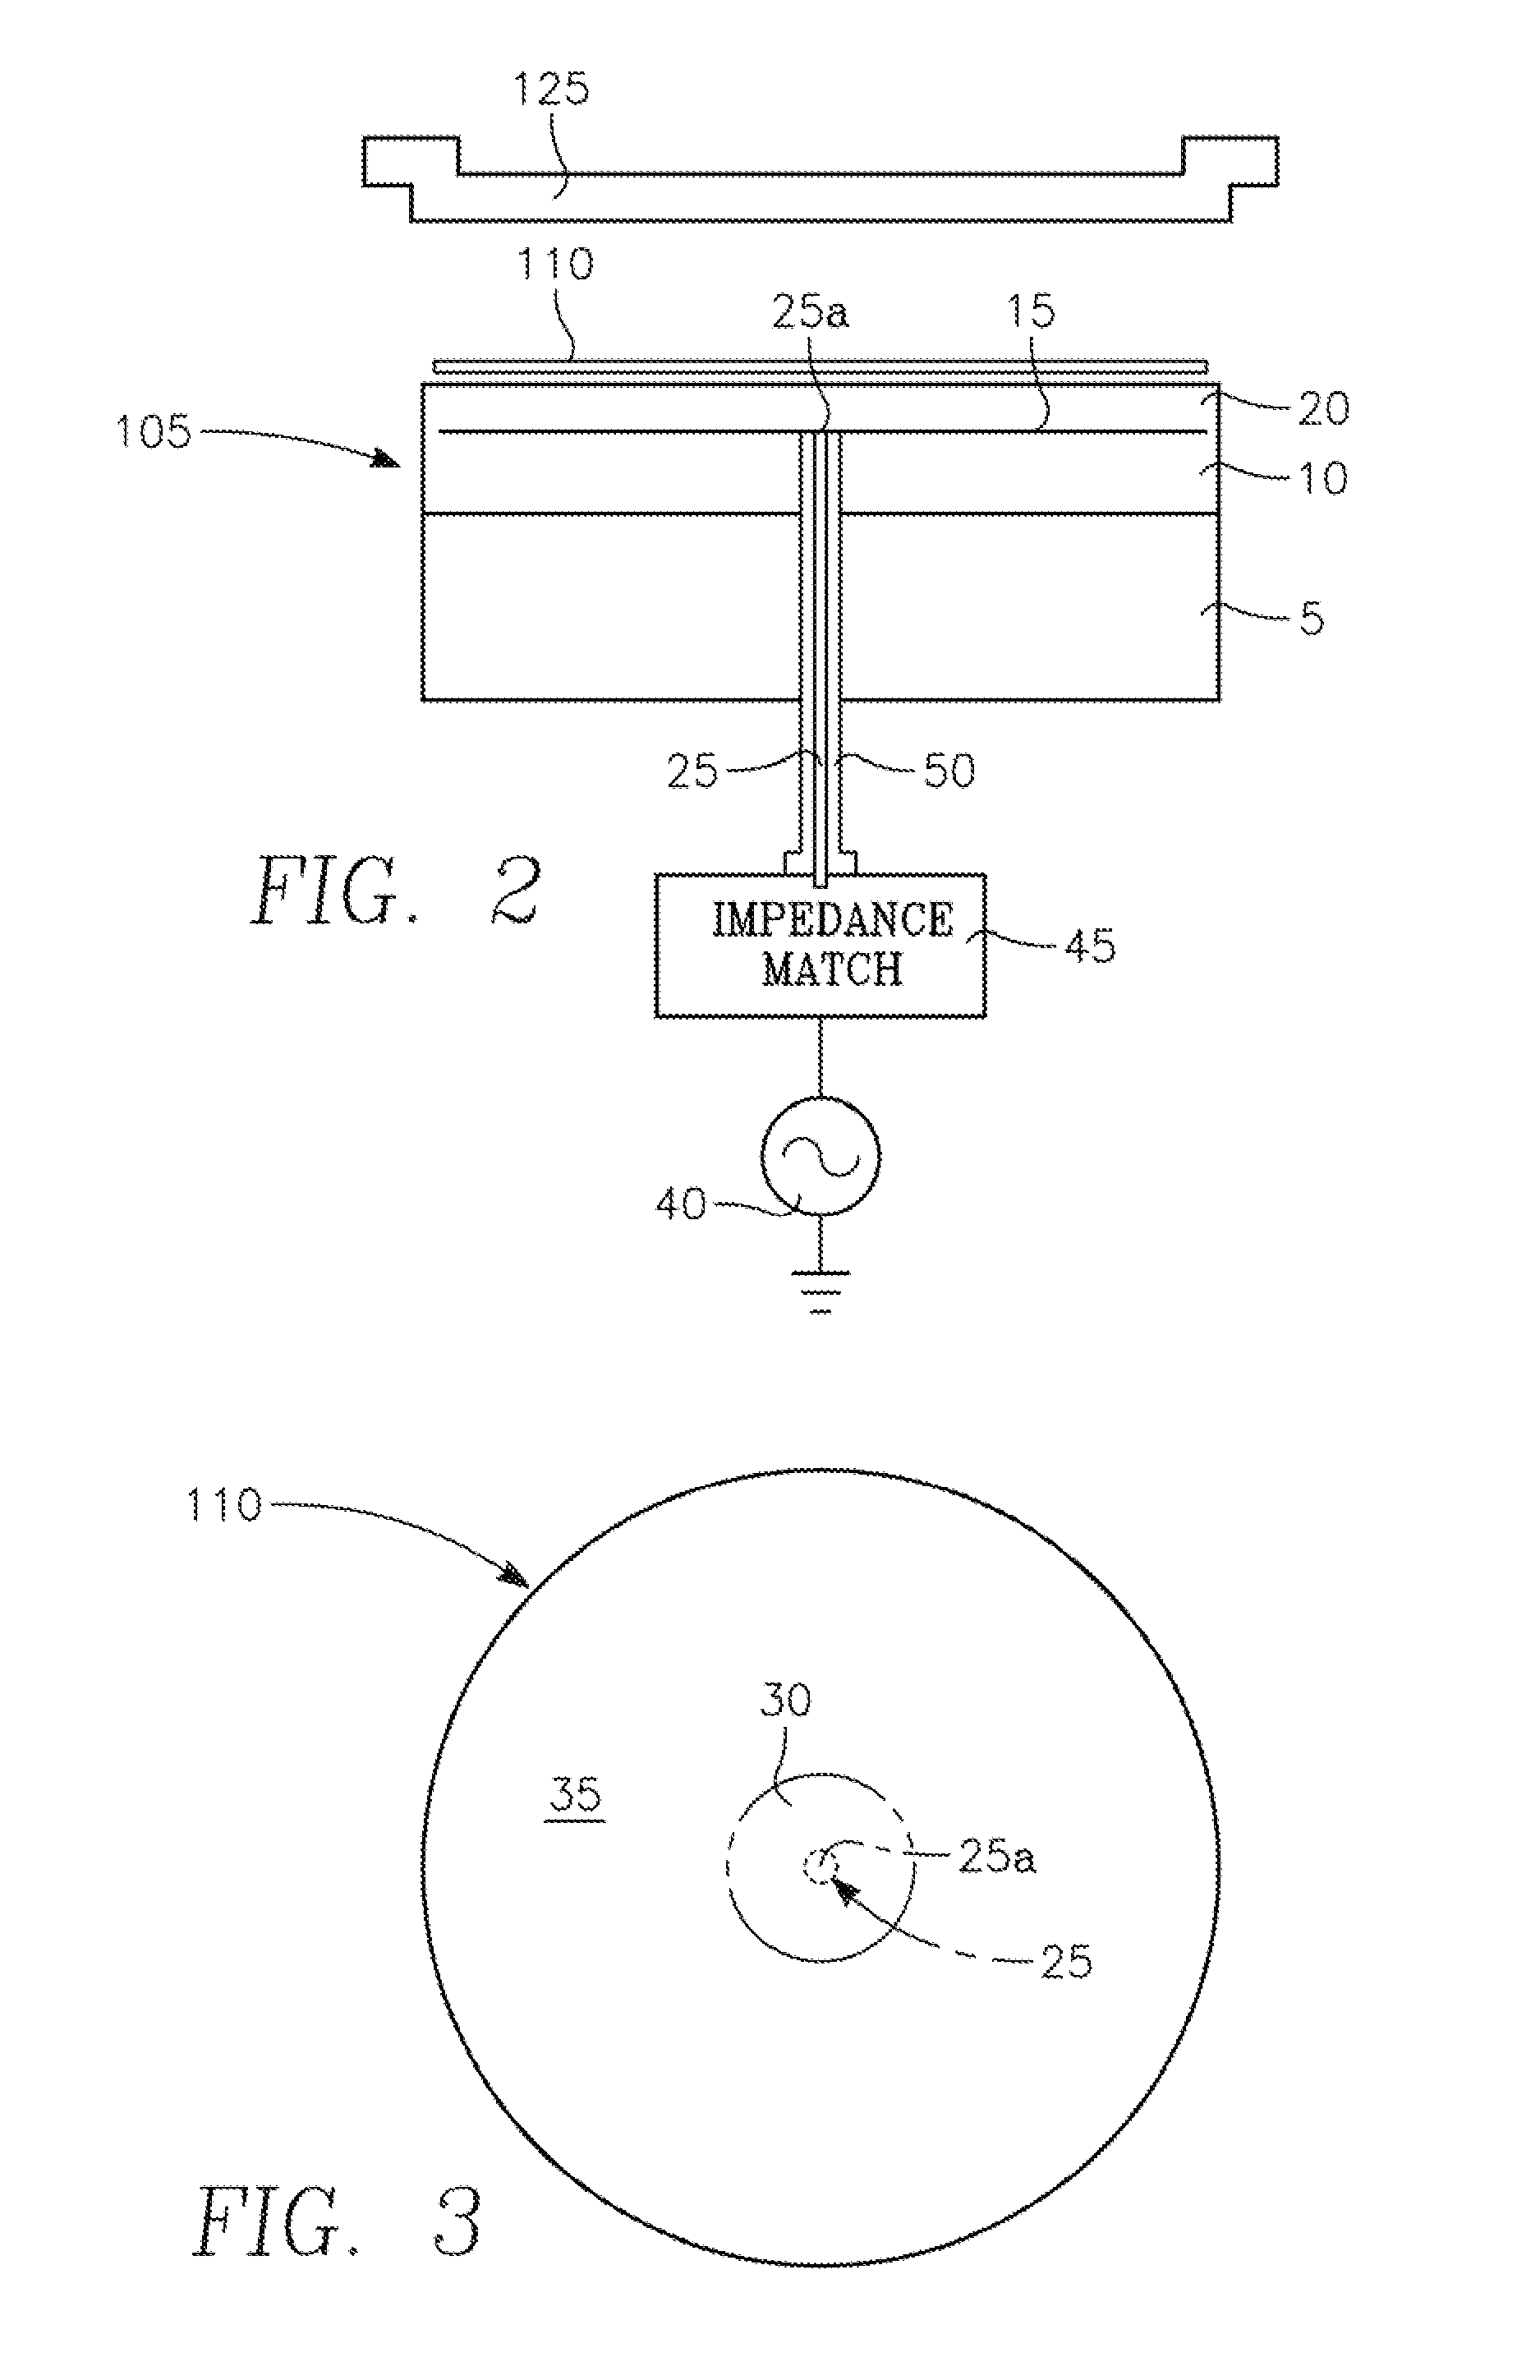 Capacitivley coupled plasma reactor having a cooled/heated wafer support with uniform temperature distribution